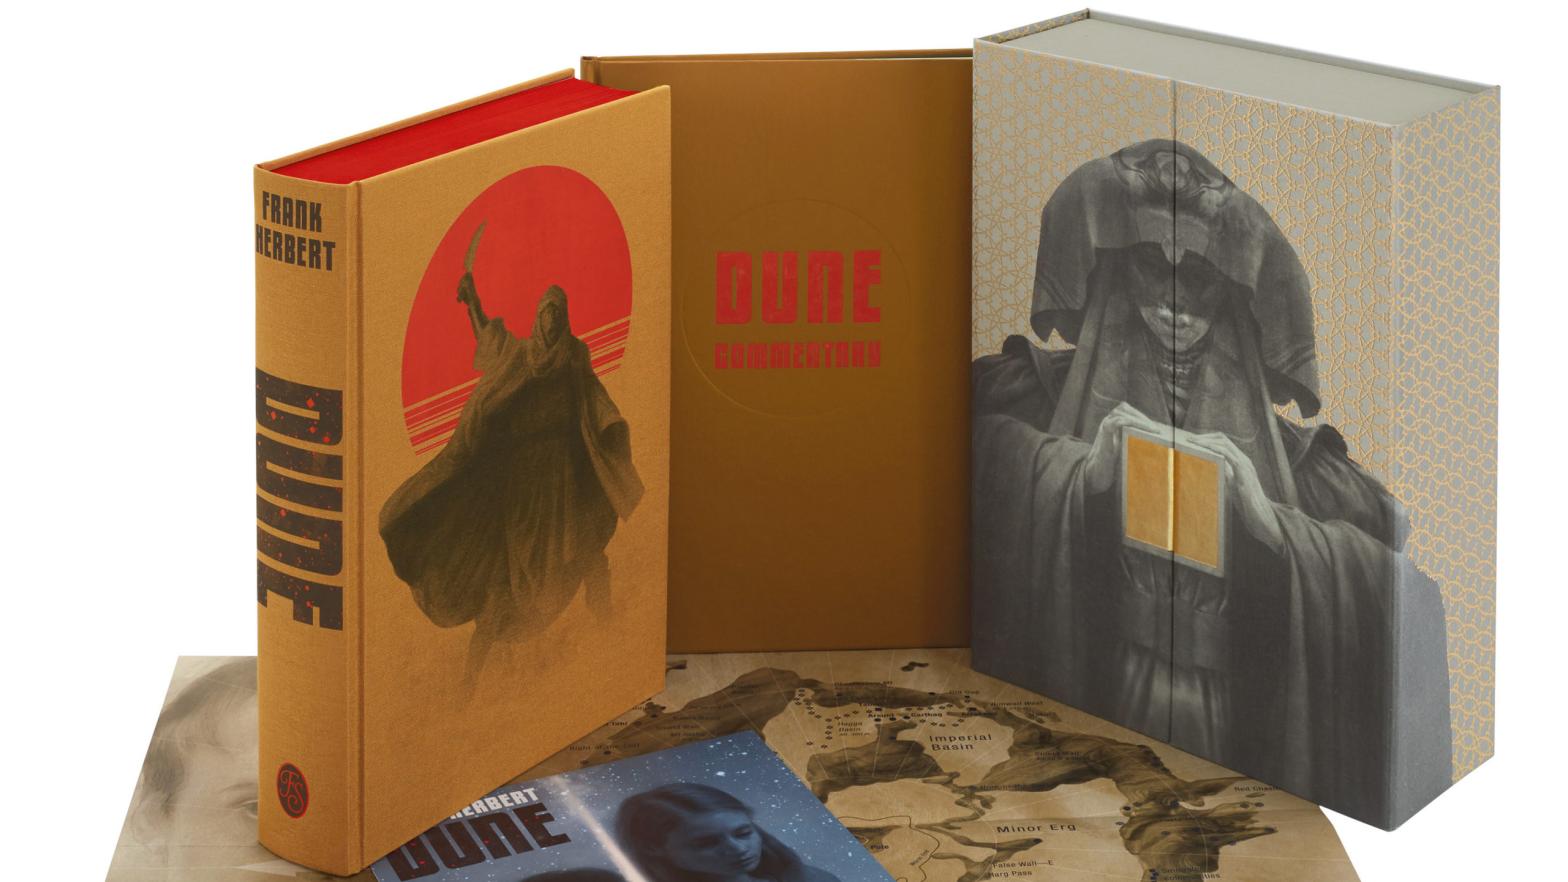 A look at the limited-edition copy of Dune. (Image: Folio Society)